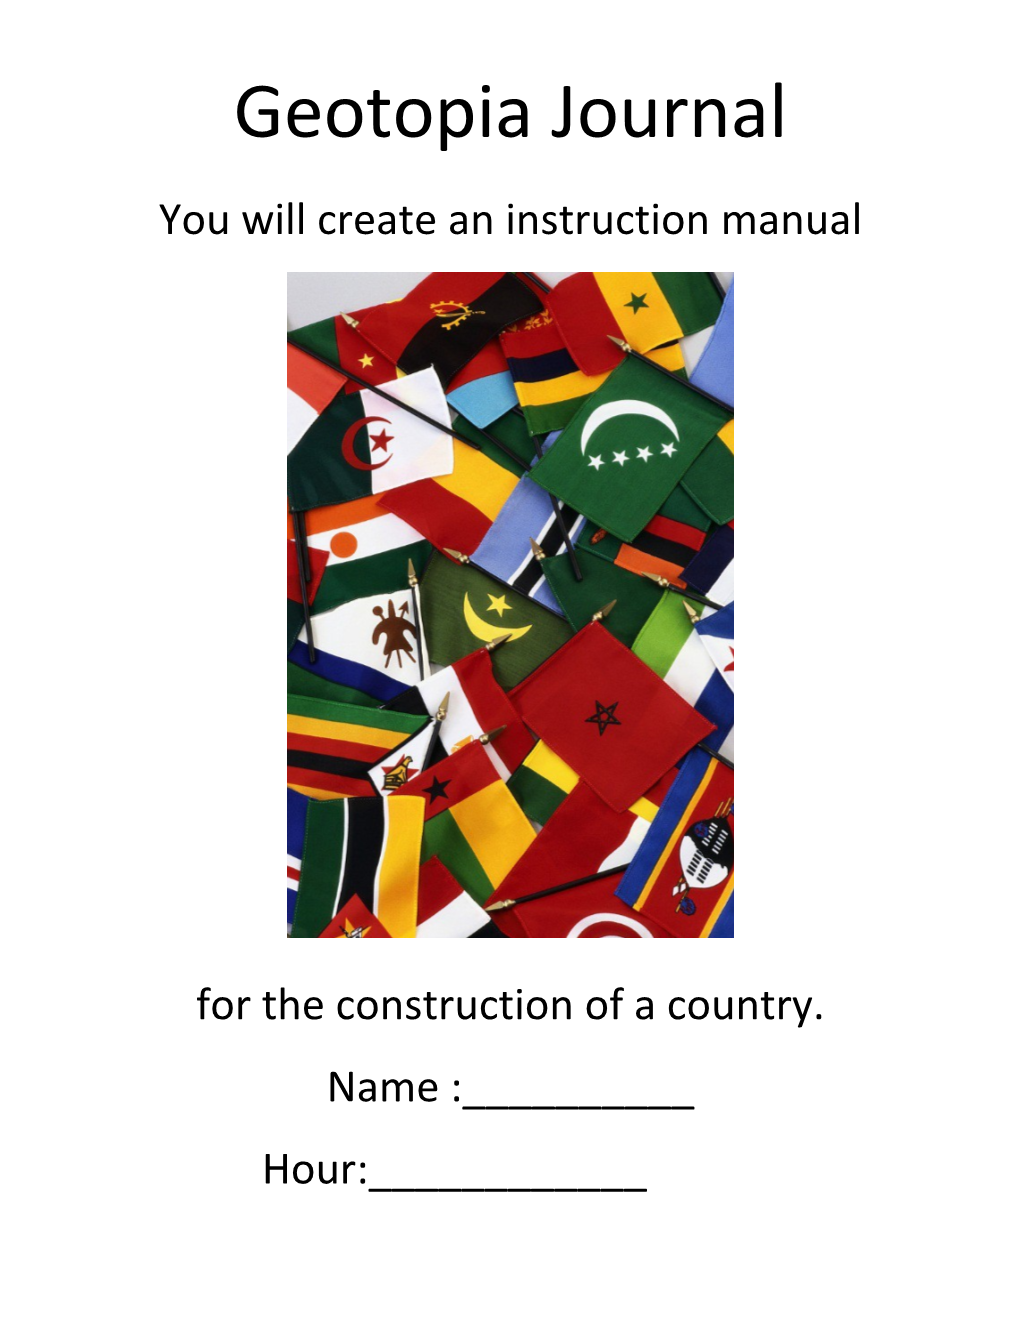 You Will Create an Instruction Manual